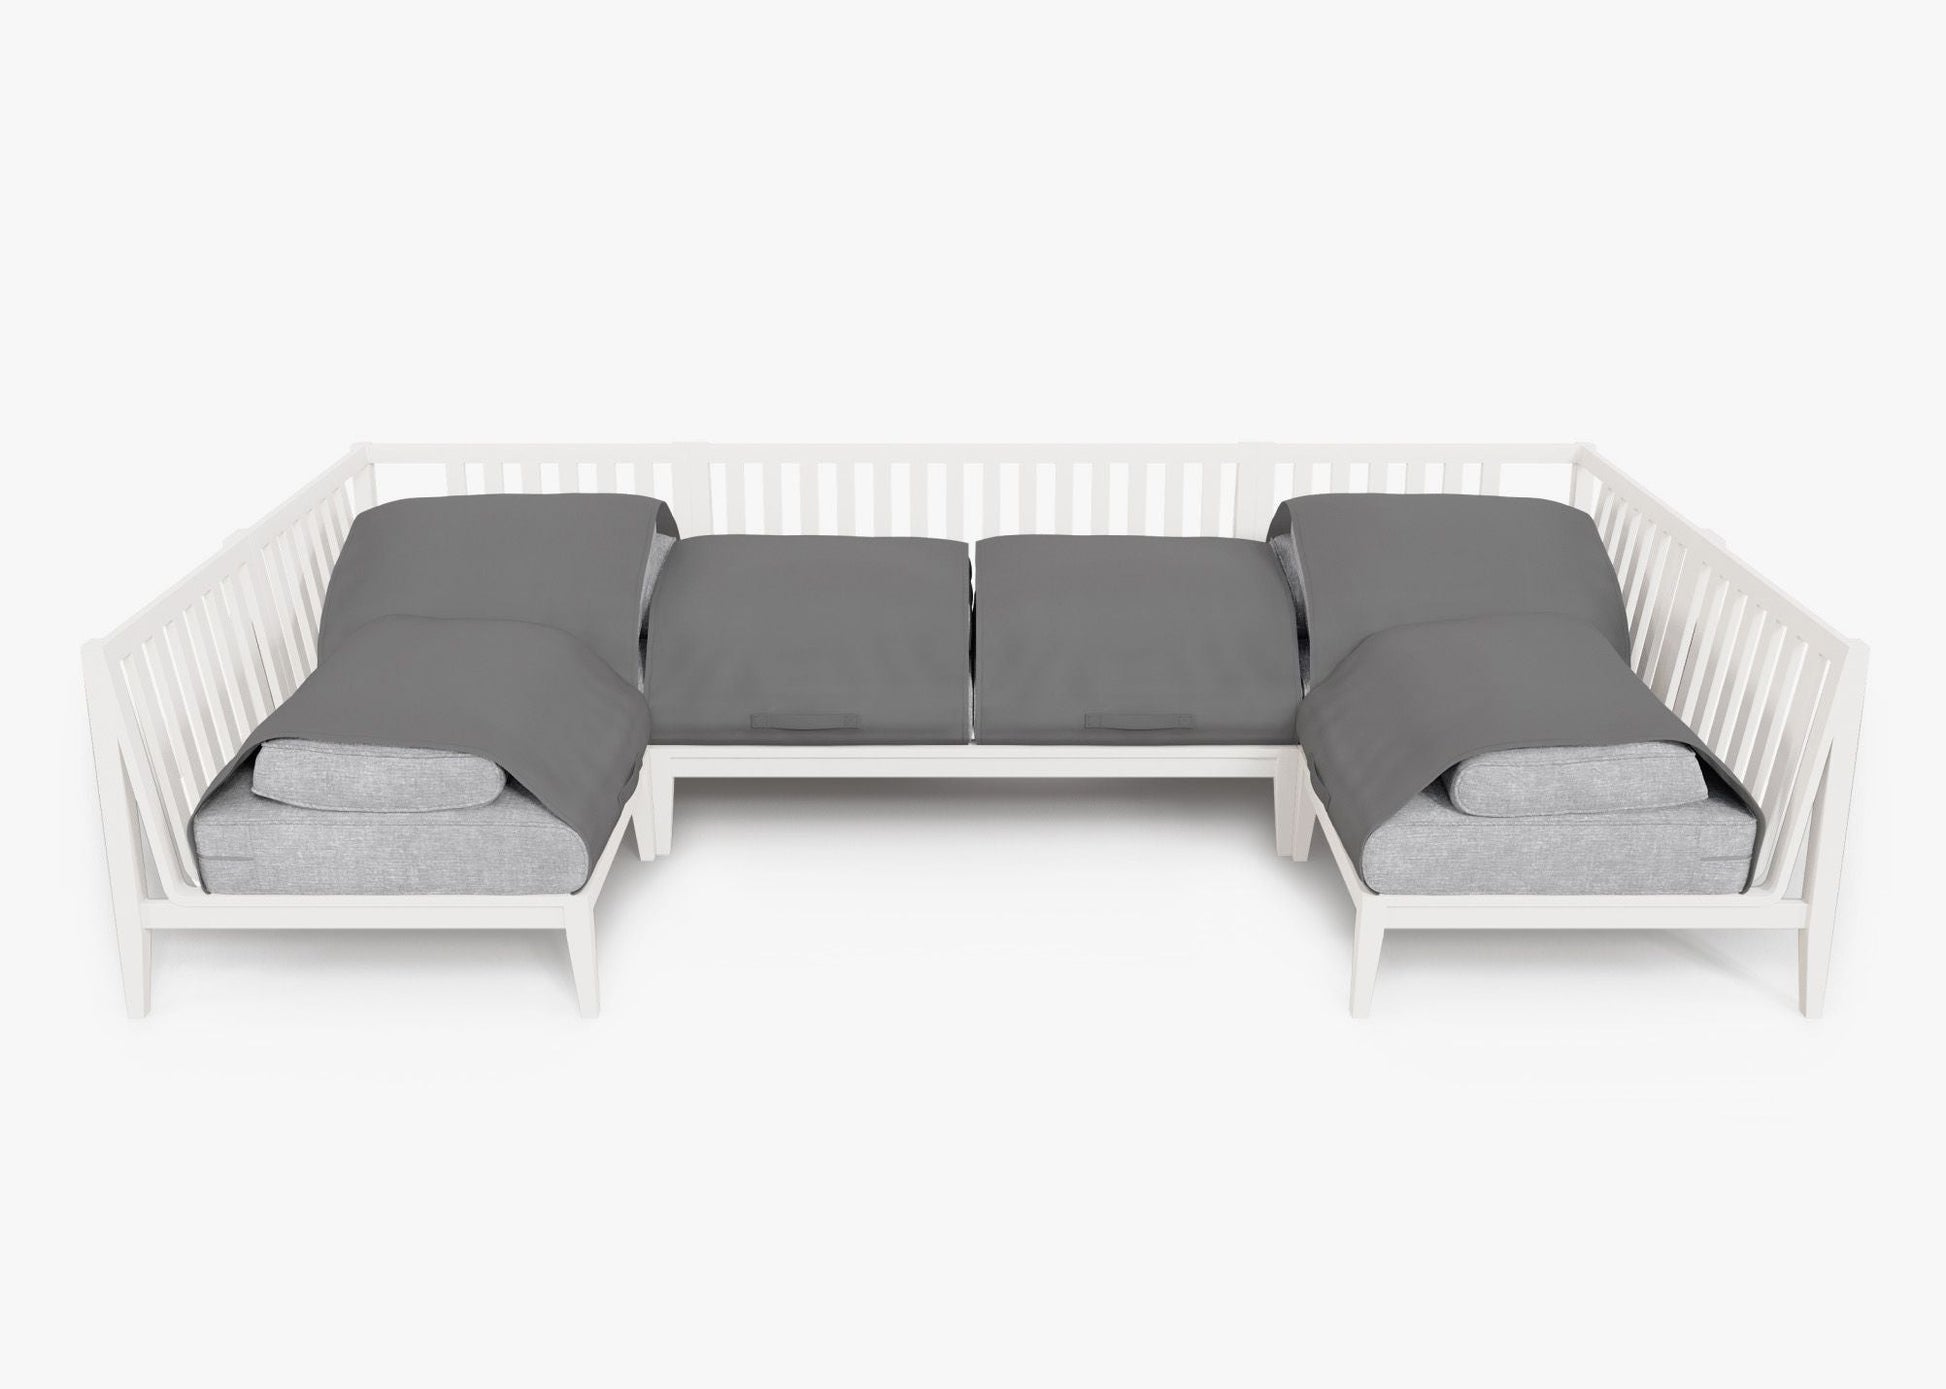 Live Outer 127" x 64" White Aluminum Outdoor U Sectional 6-Seat With Pacific Fog Gray Cushion